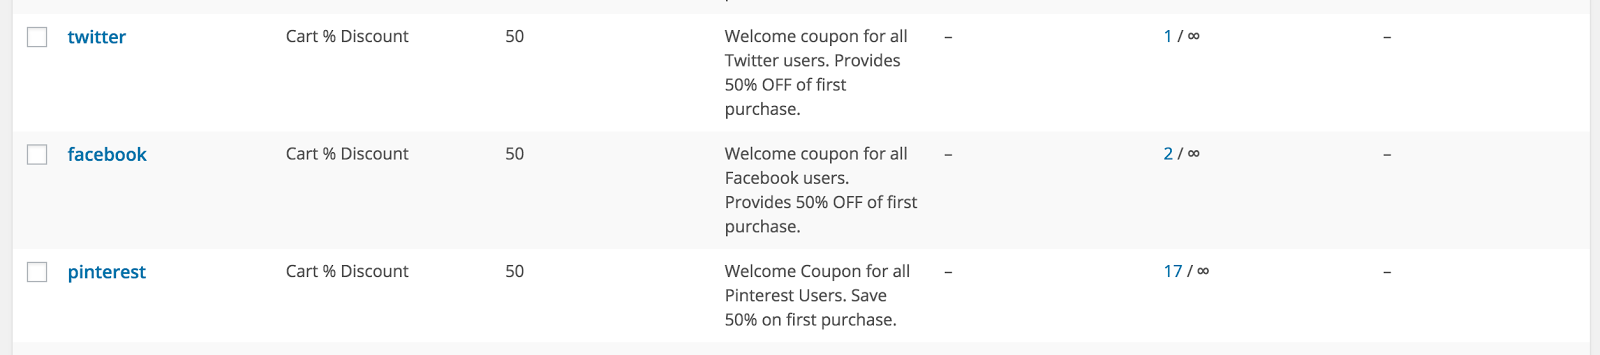 Creating coupons to match the campaigns and help with tracking/analytics